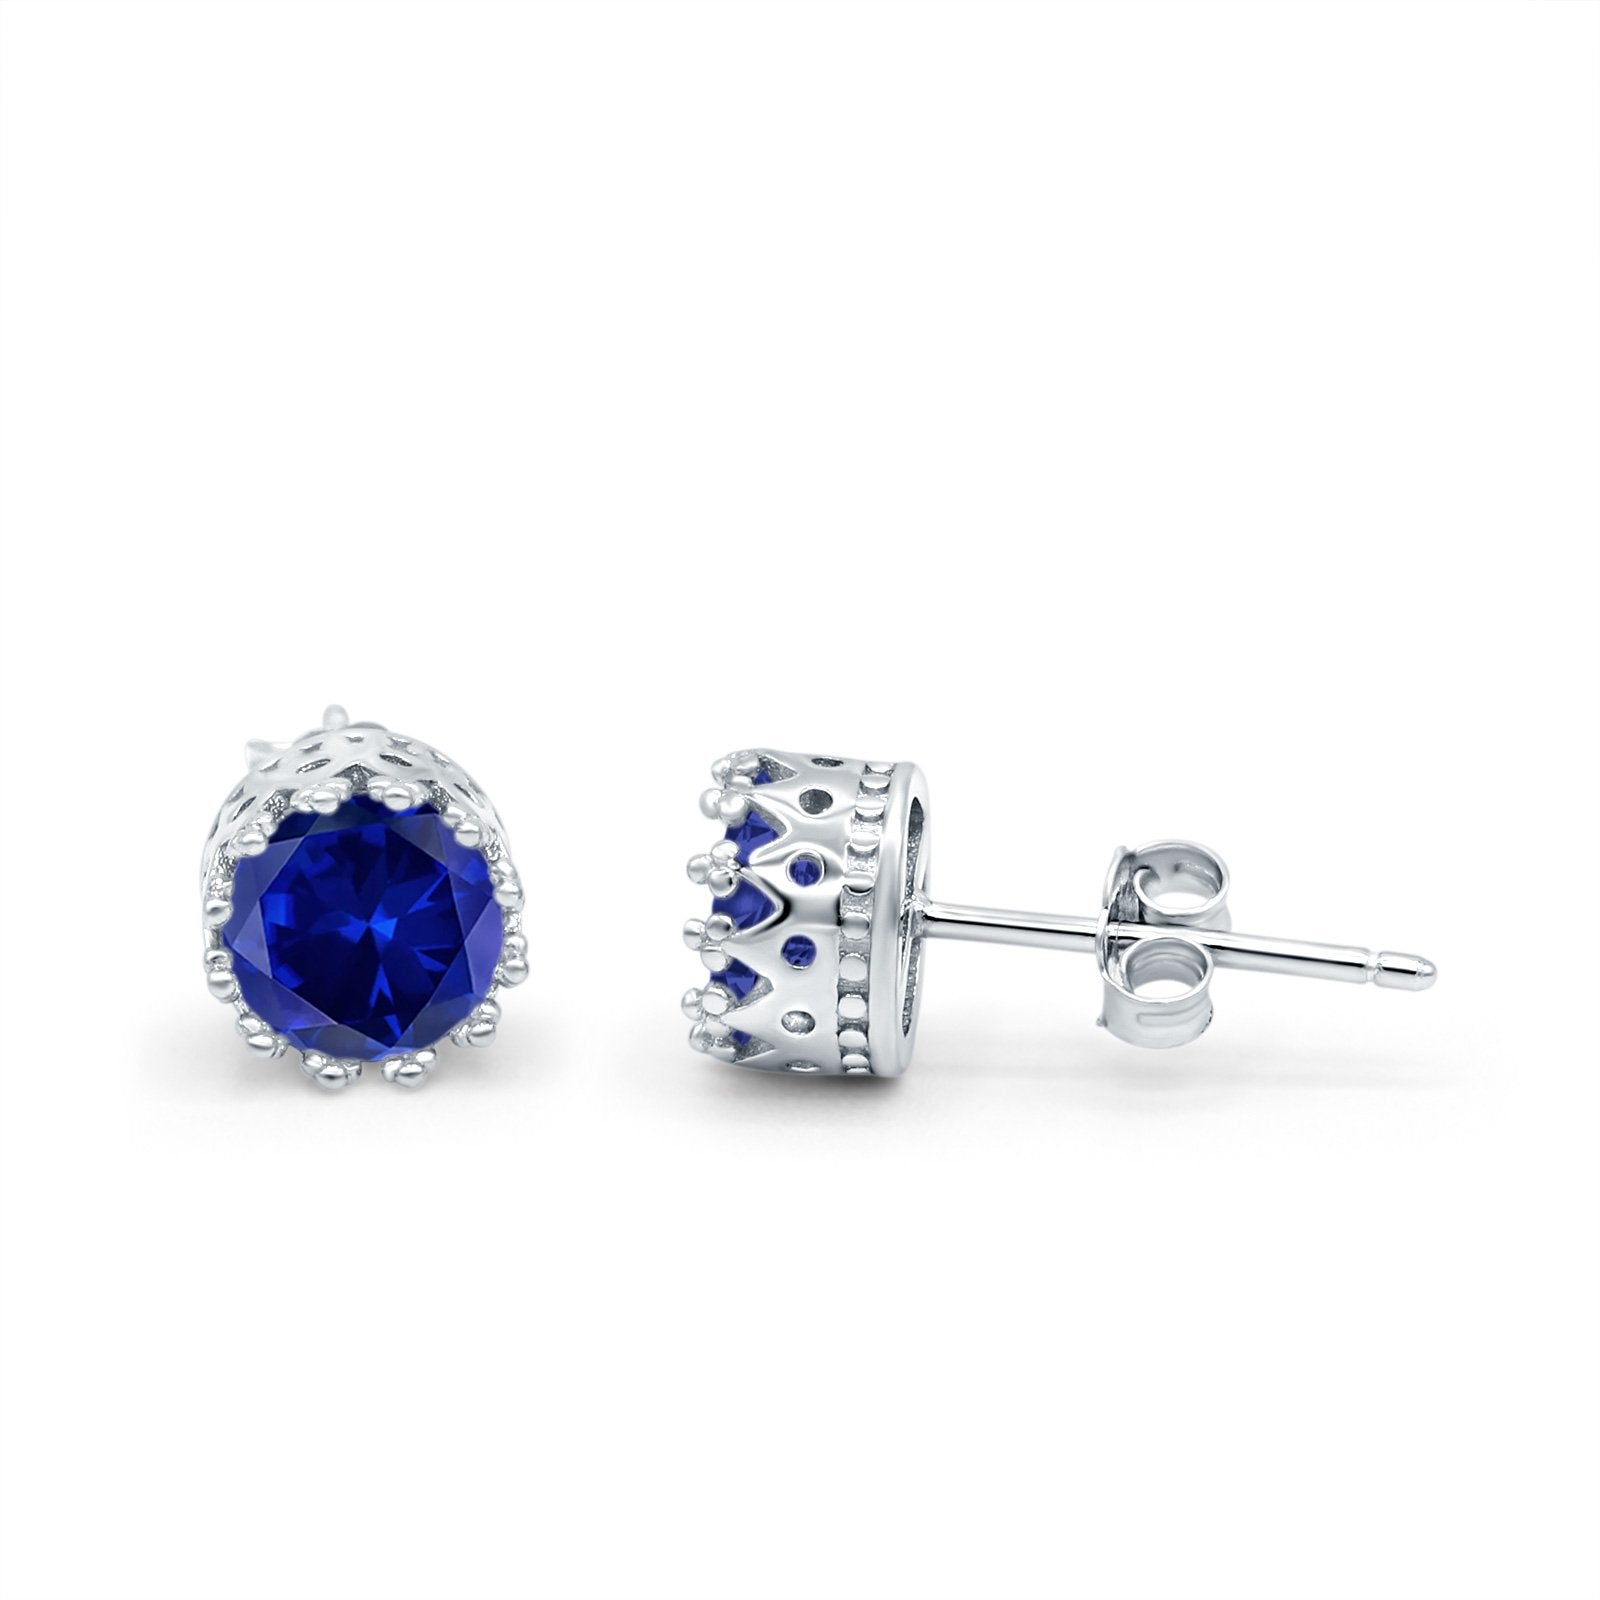 Wedding Bridal Stud Earrings Round Simulated CZ 925 Sterling Silver